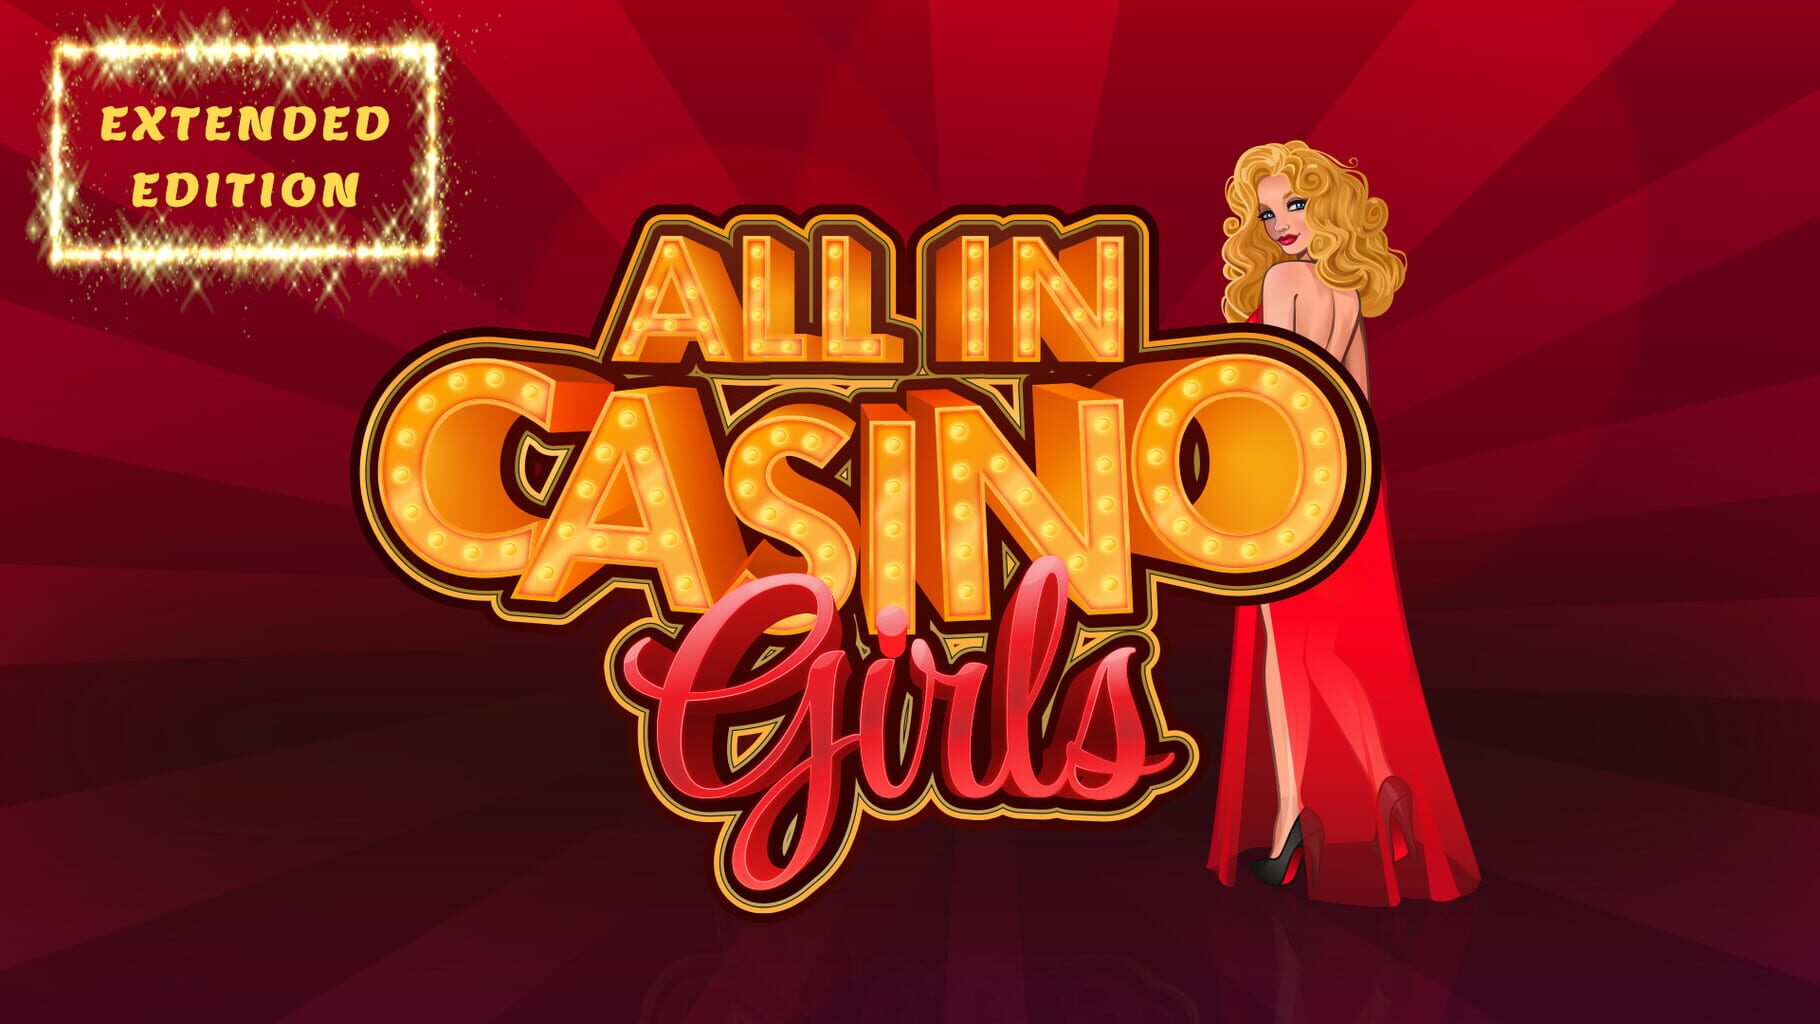 All in Casino Girls: Extended Edition artwork